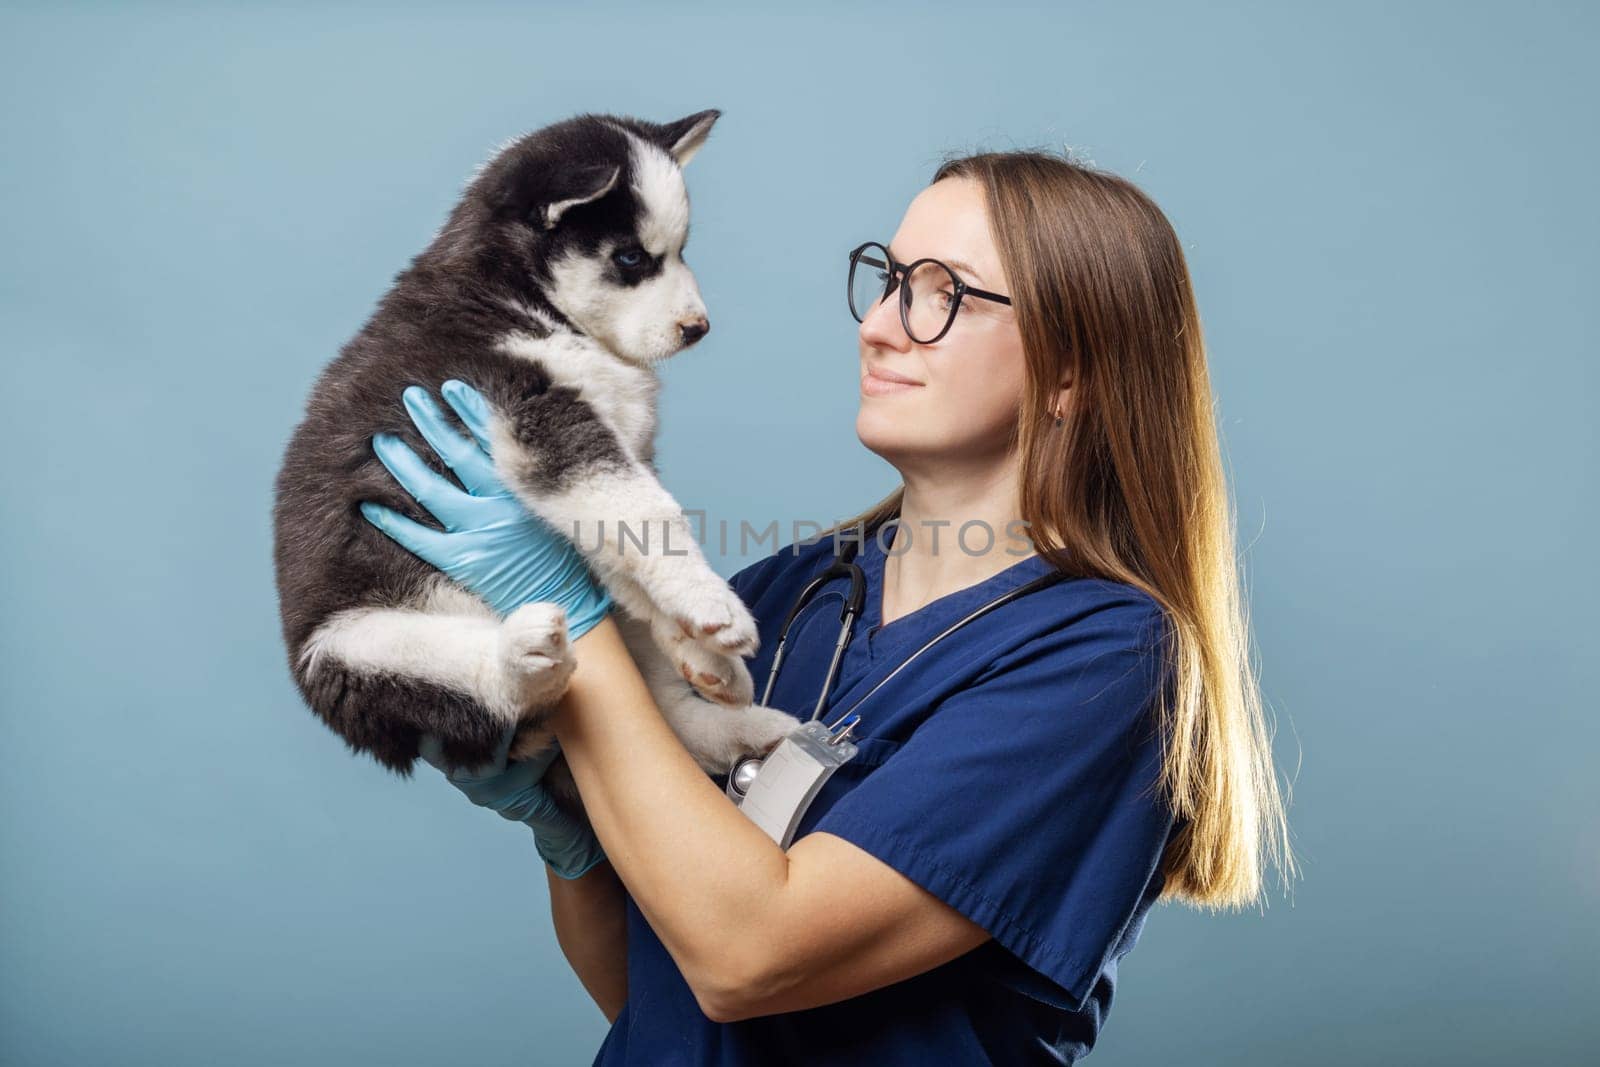 Veterinarian holding a Husky puppy with blue gloves. Professional pet care concept on a blue background. Design for veterinary services brochure, pet care guide